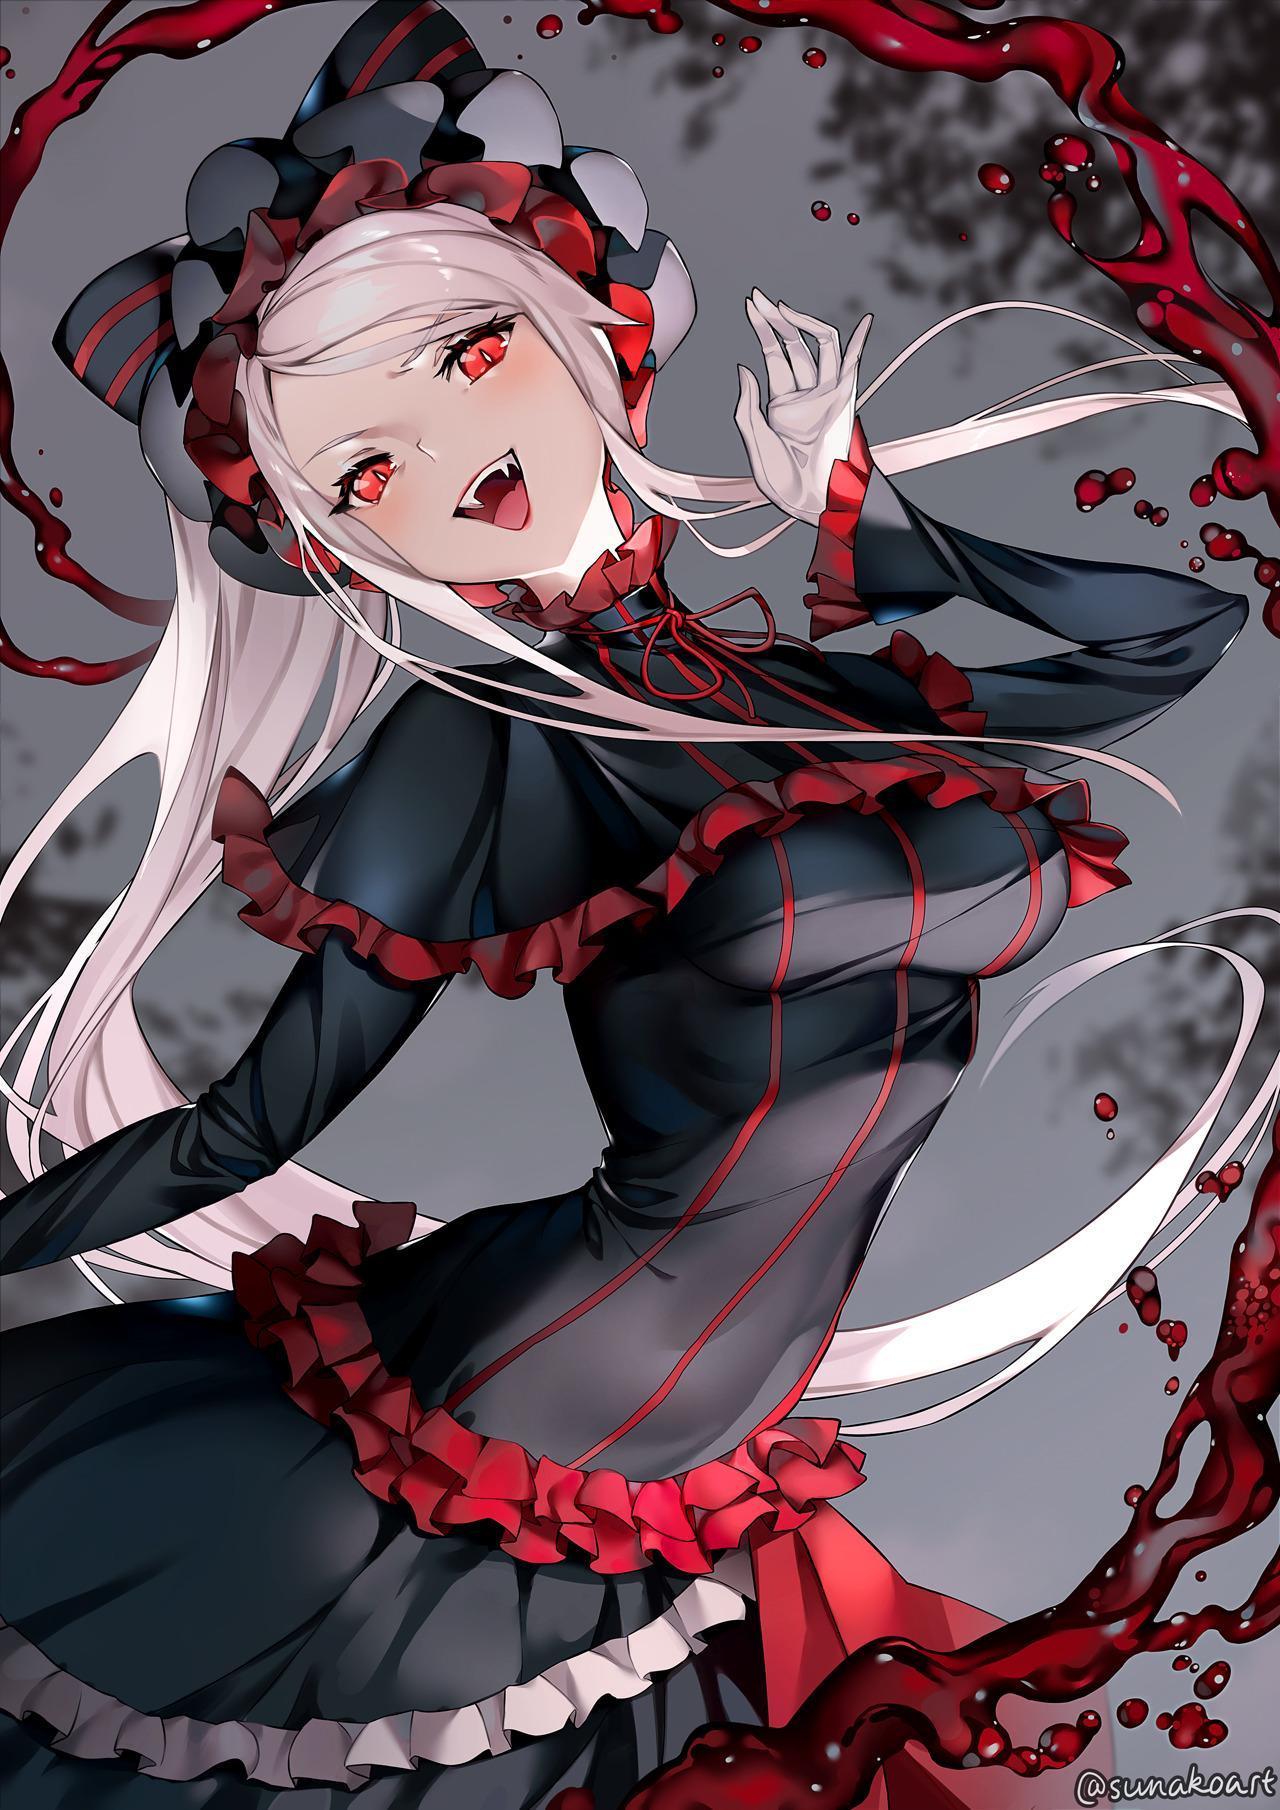 HD wallpaper, Red Eyes, Fan Art, Black Dress, Blood, Overlord Anime, Open Mouth, Laughing, Anime Girls, Long Hair, Vertical, Grey Hair, Shalltear Bloodfallen, Small Boobs, 2D, Looking At Viewer, Vampires, Anime